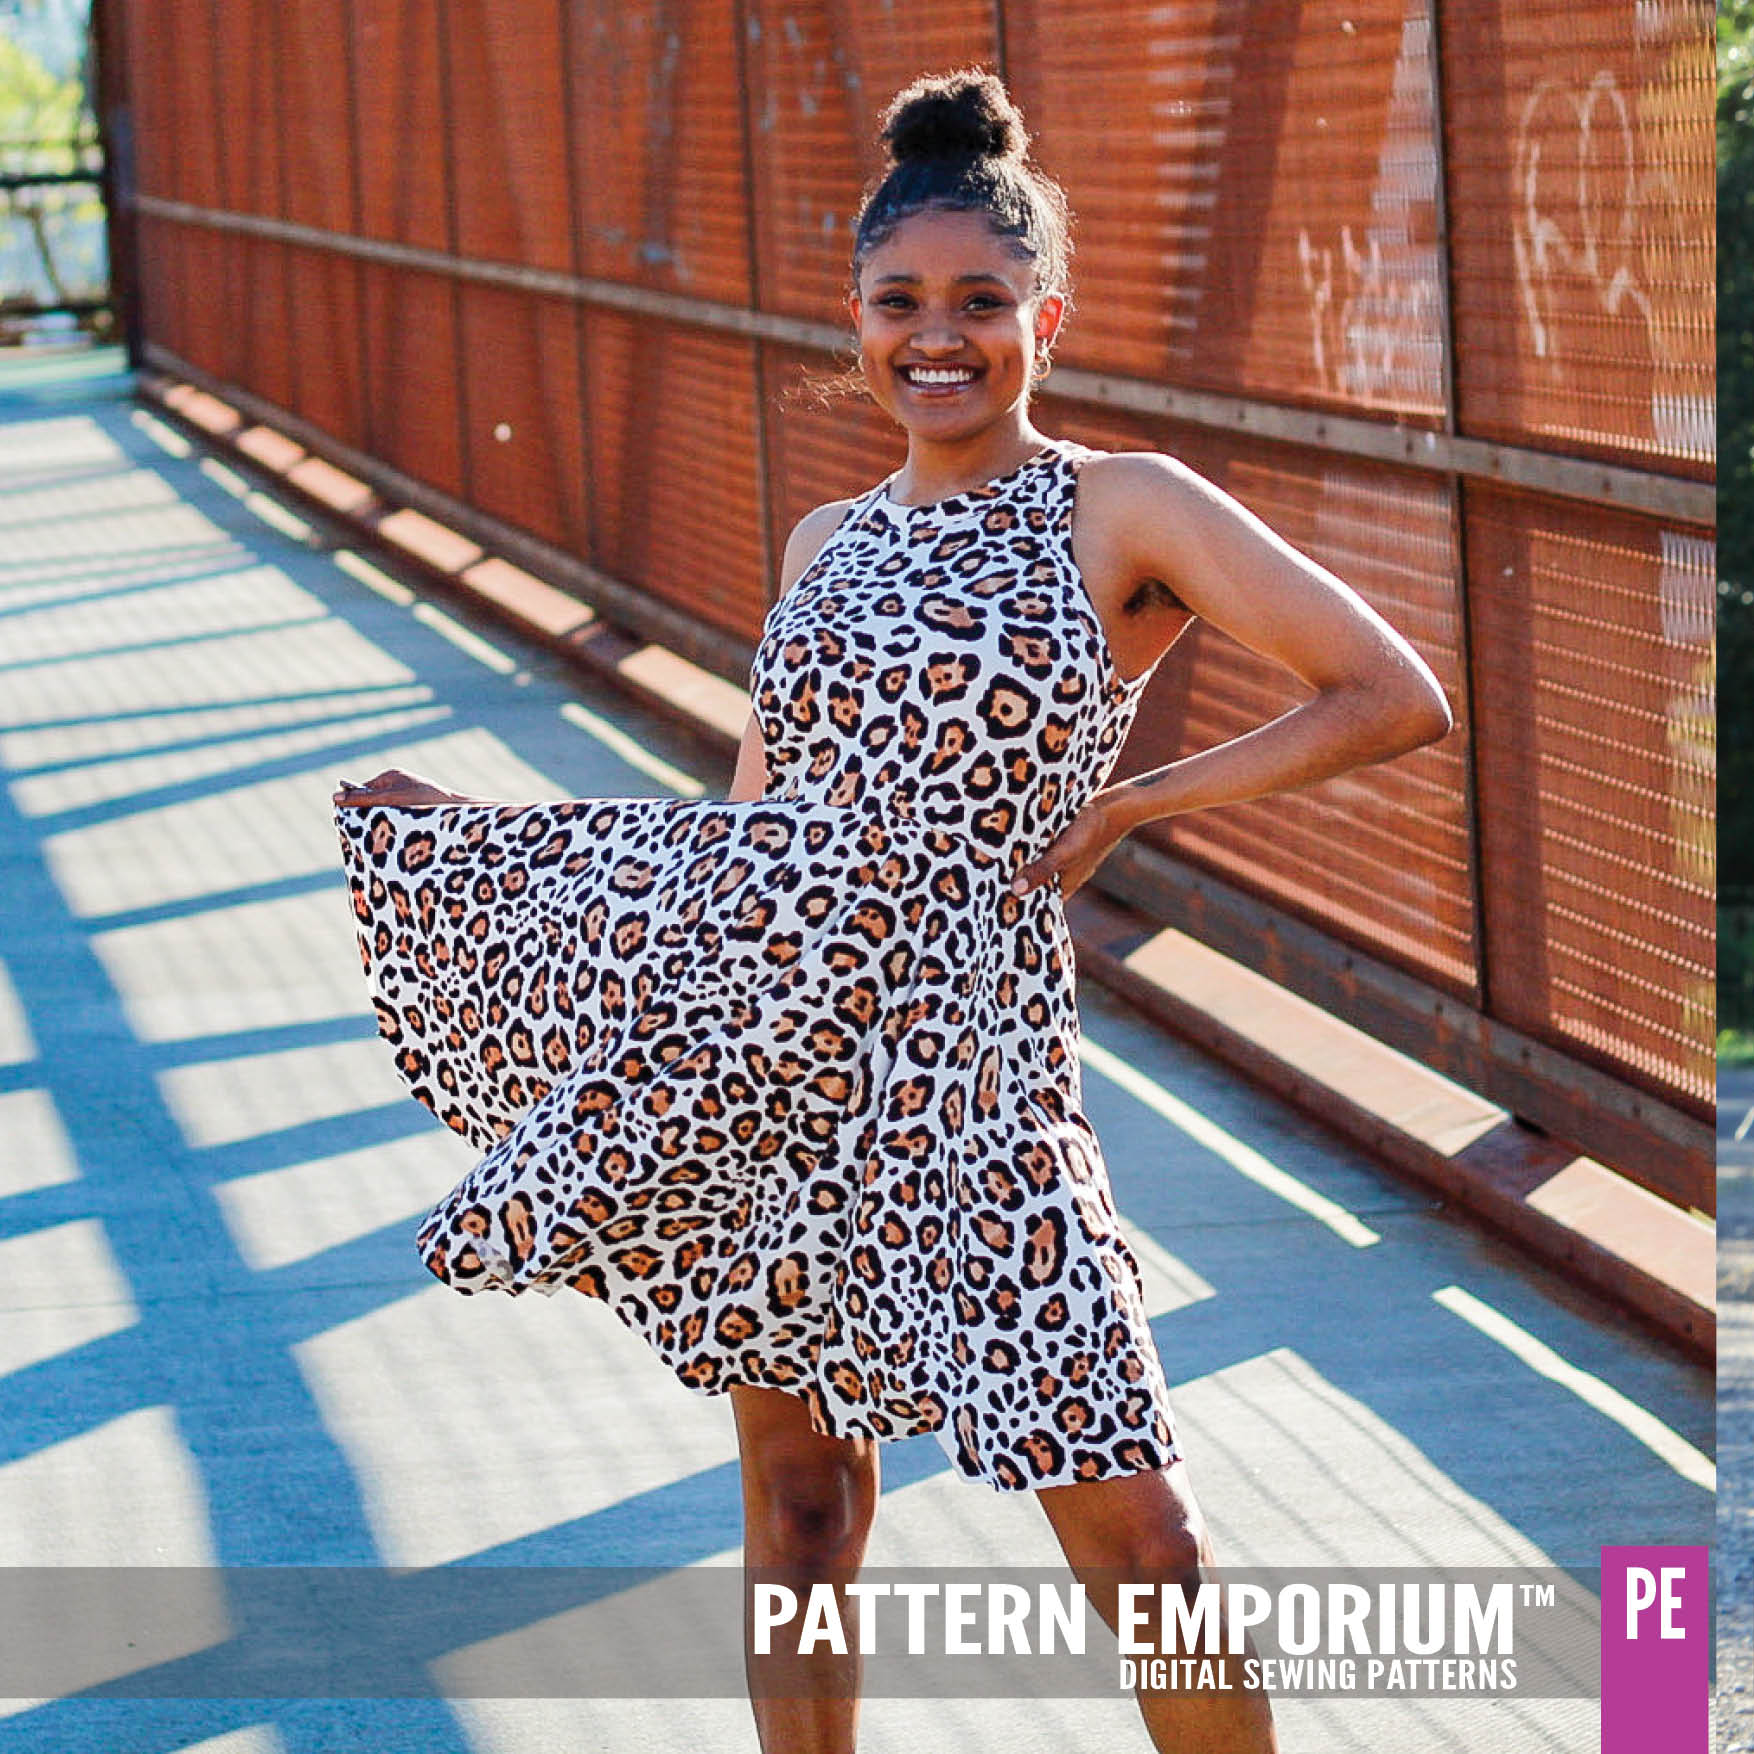 PDF Sewing Patterns Online - Downloadable Sewing Patterns – TREASURIE